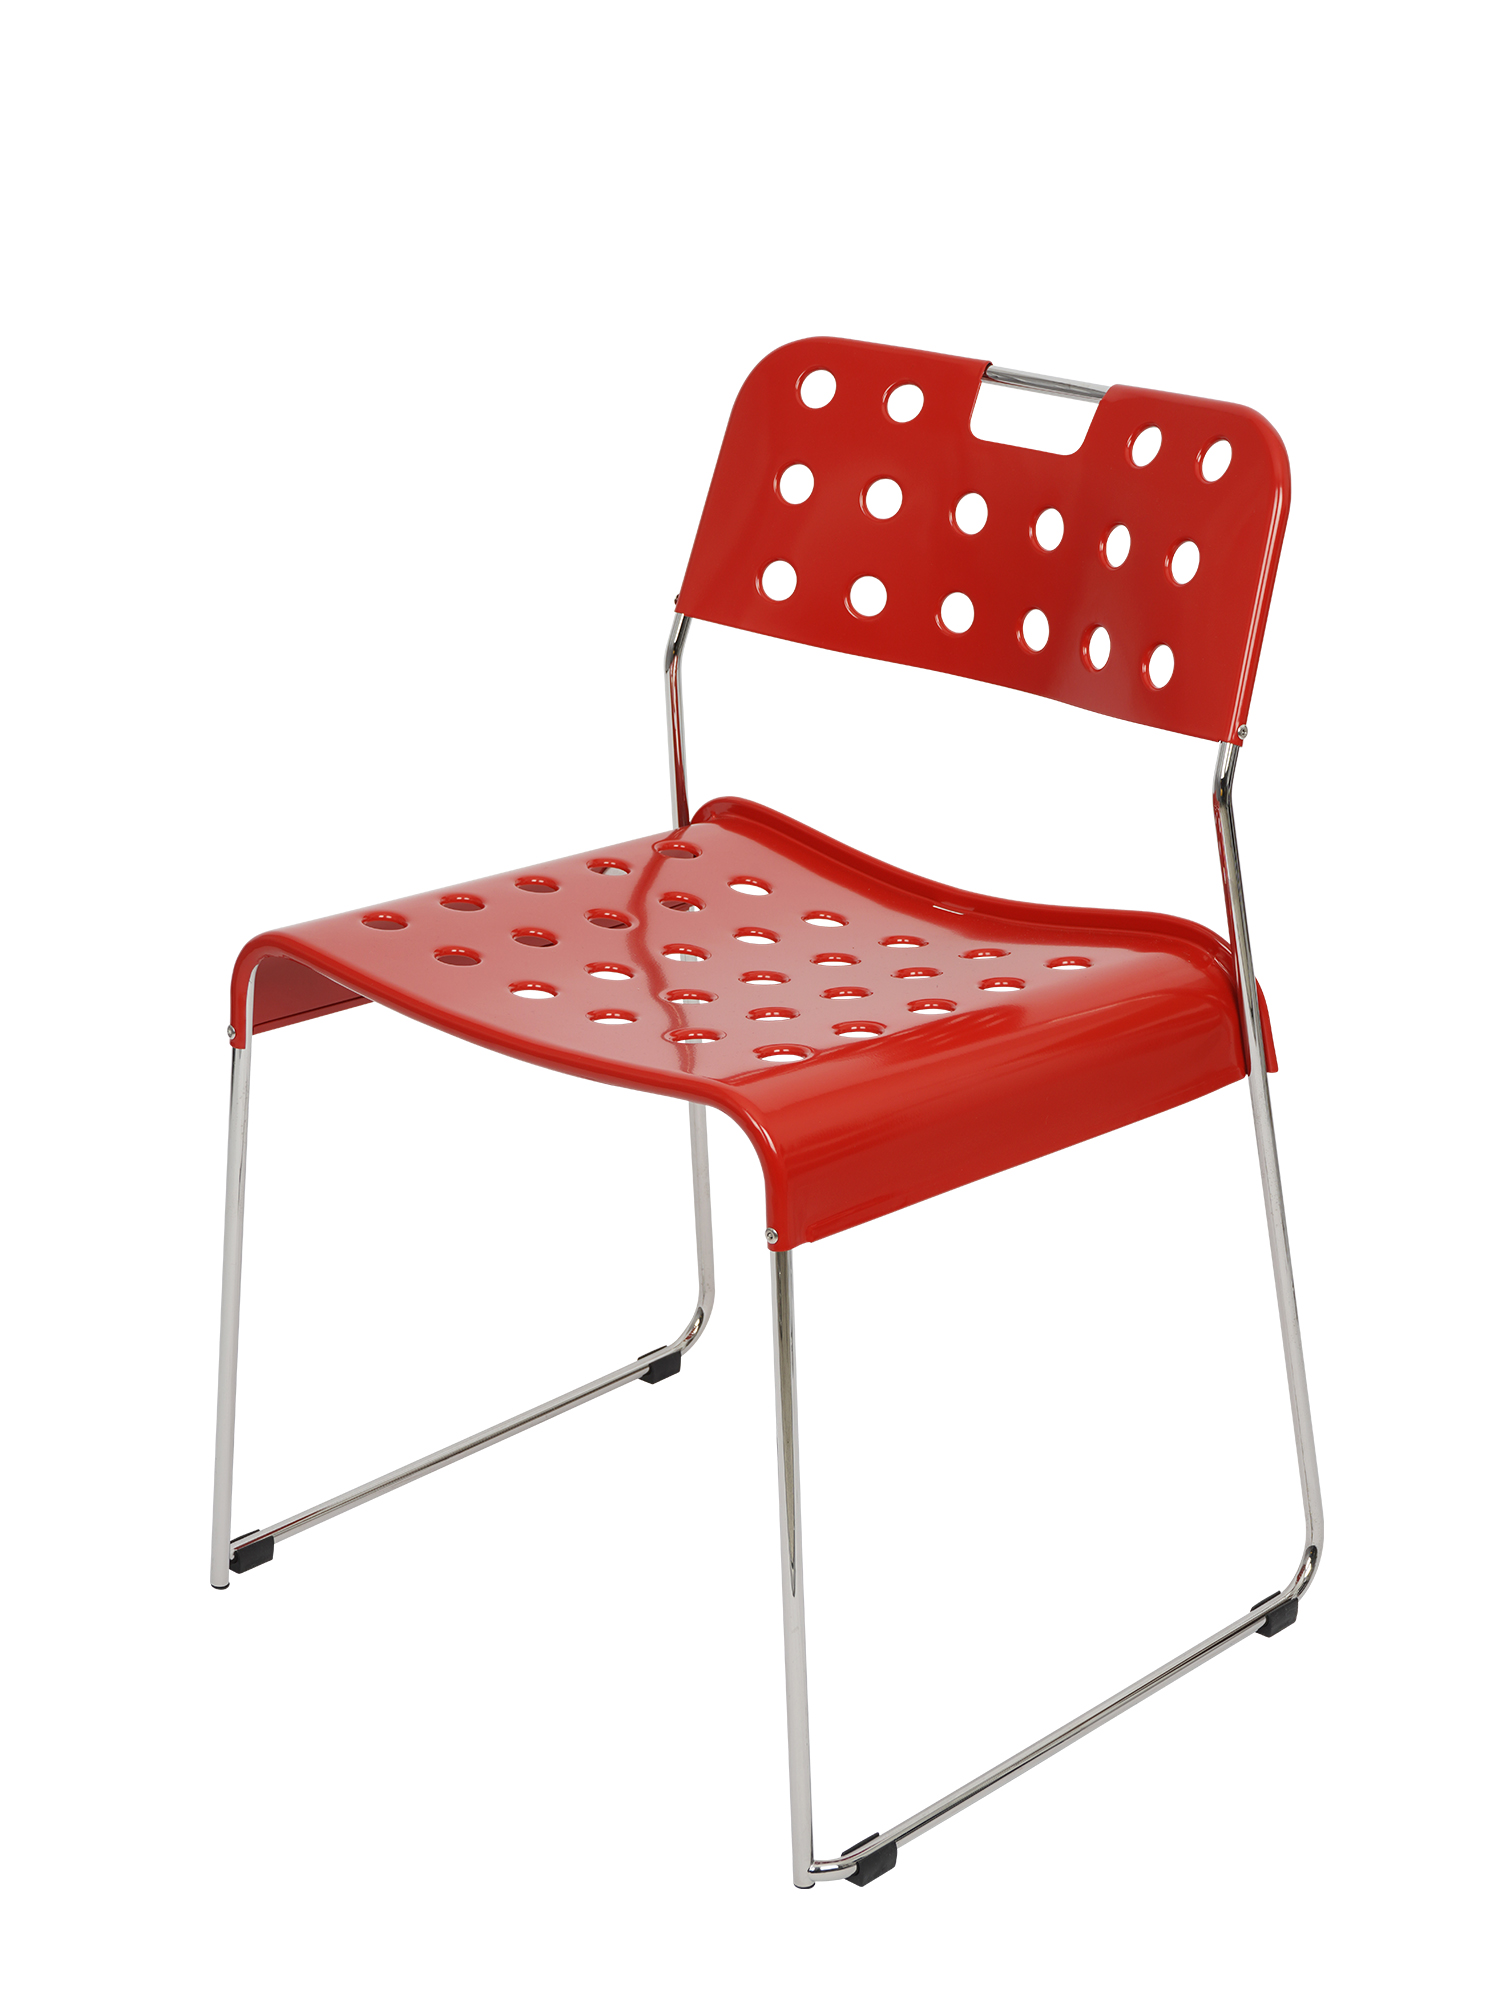 [OMK] Omkstak Side Chair Tomato Red